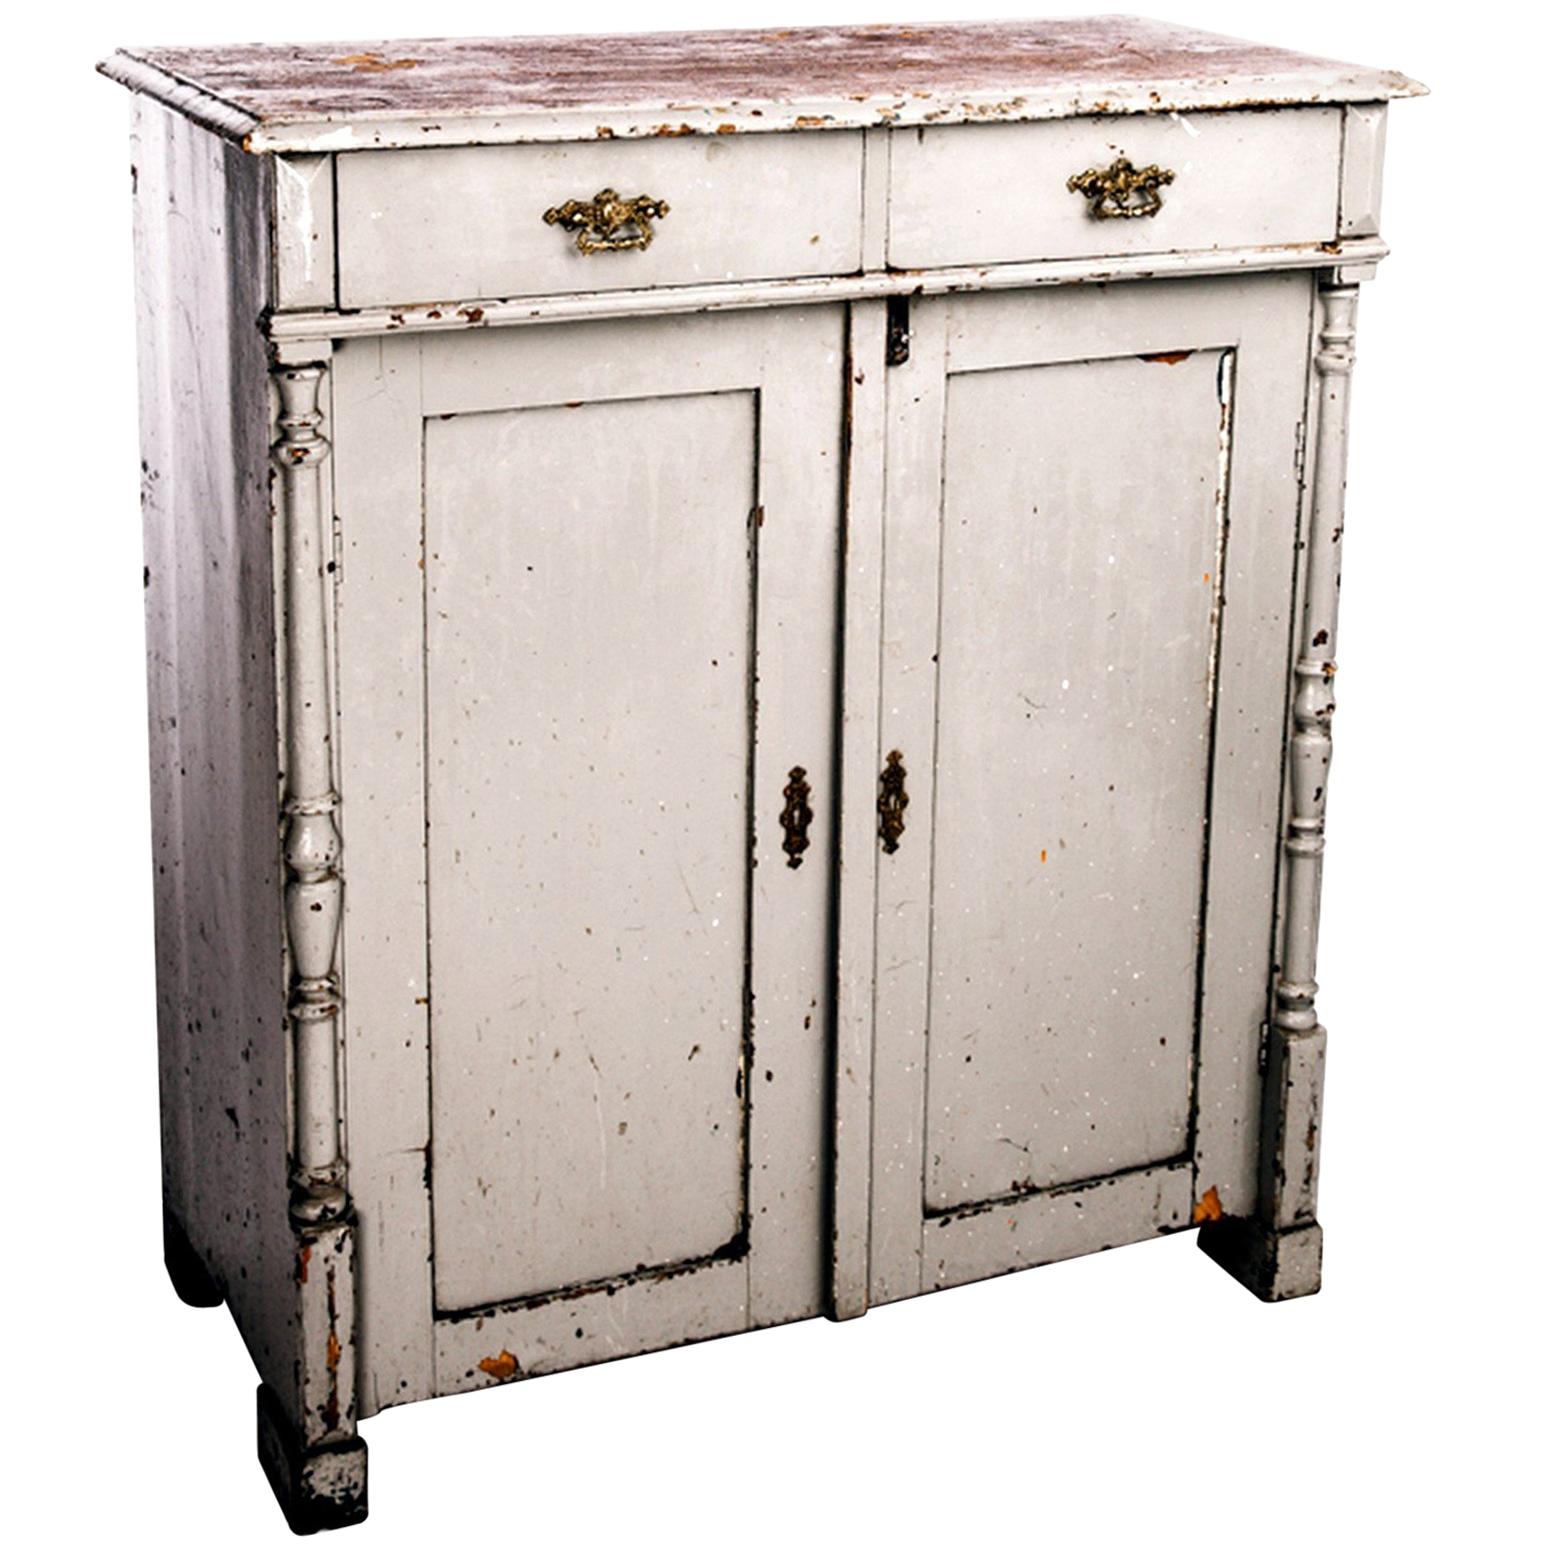 Antique Kitchen Cabinet from Sweden, Early 1900s